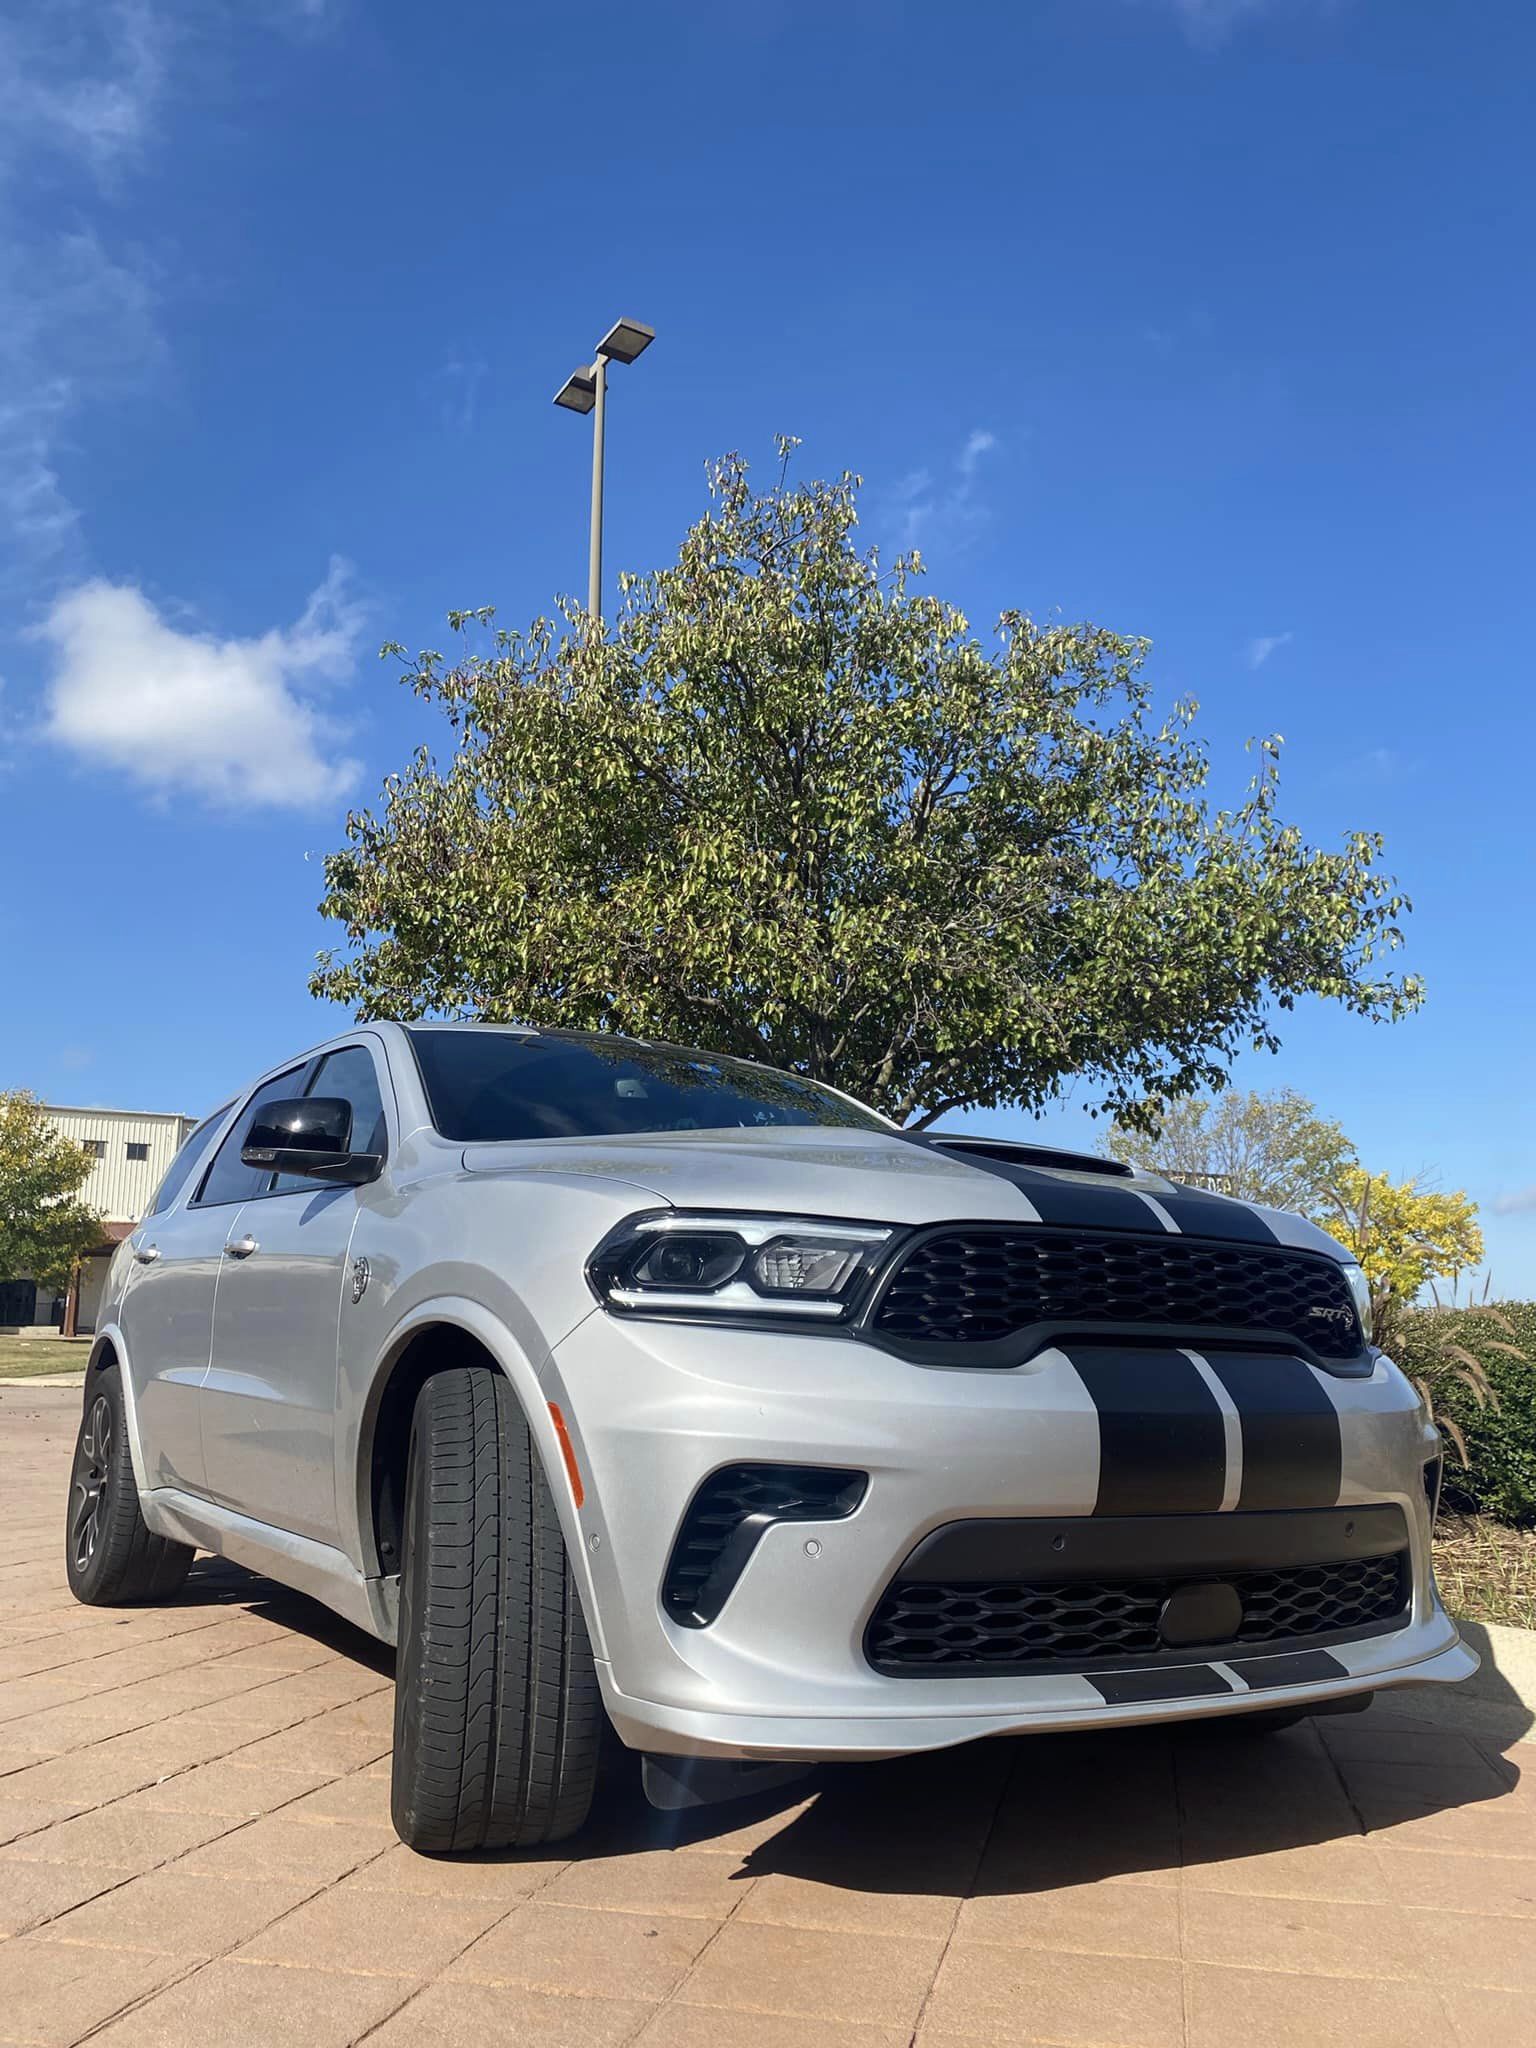 Drive: American Muscle But Make it Family, Meet the 2023 Dodge Durango